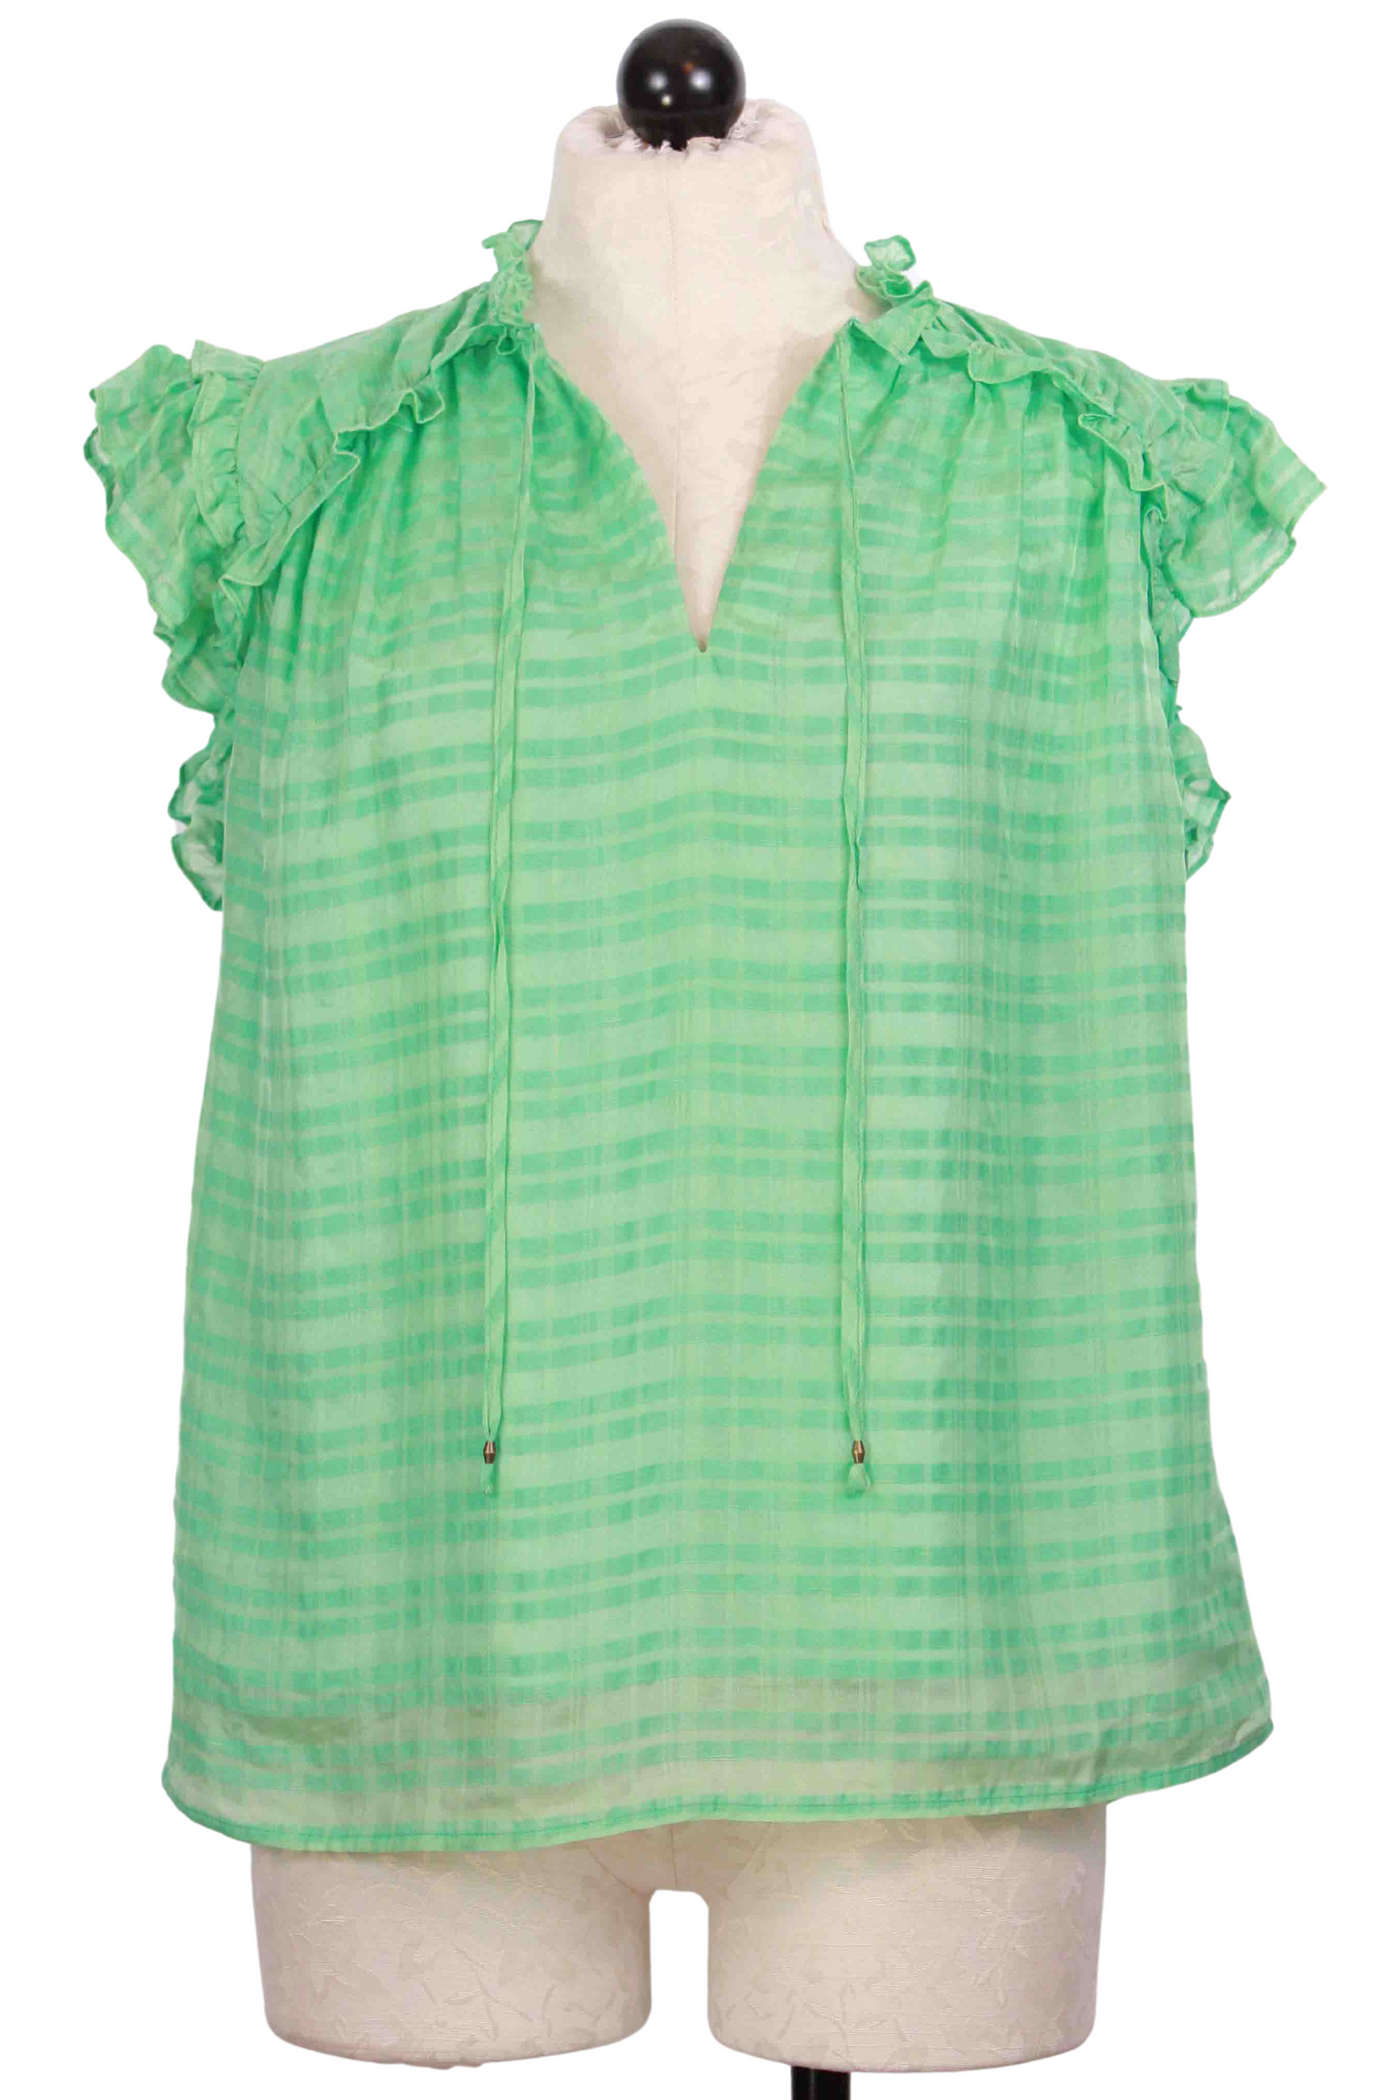 Matcha colored tie neck Tate Top by Marie Oliver untied